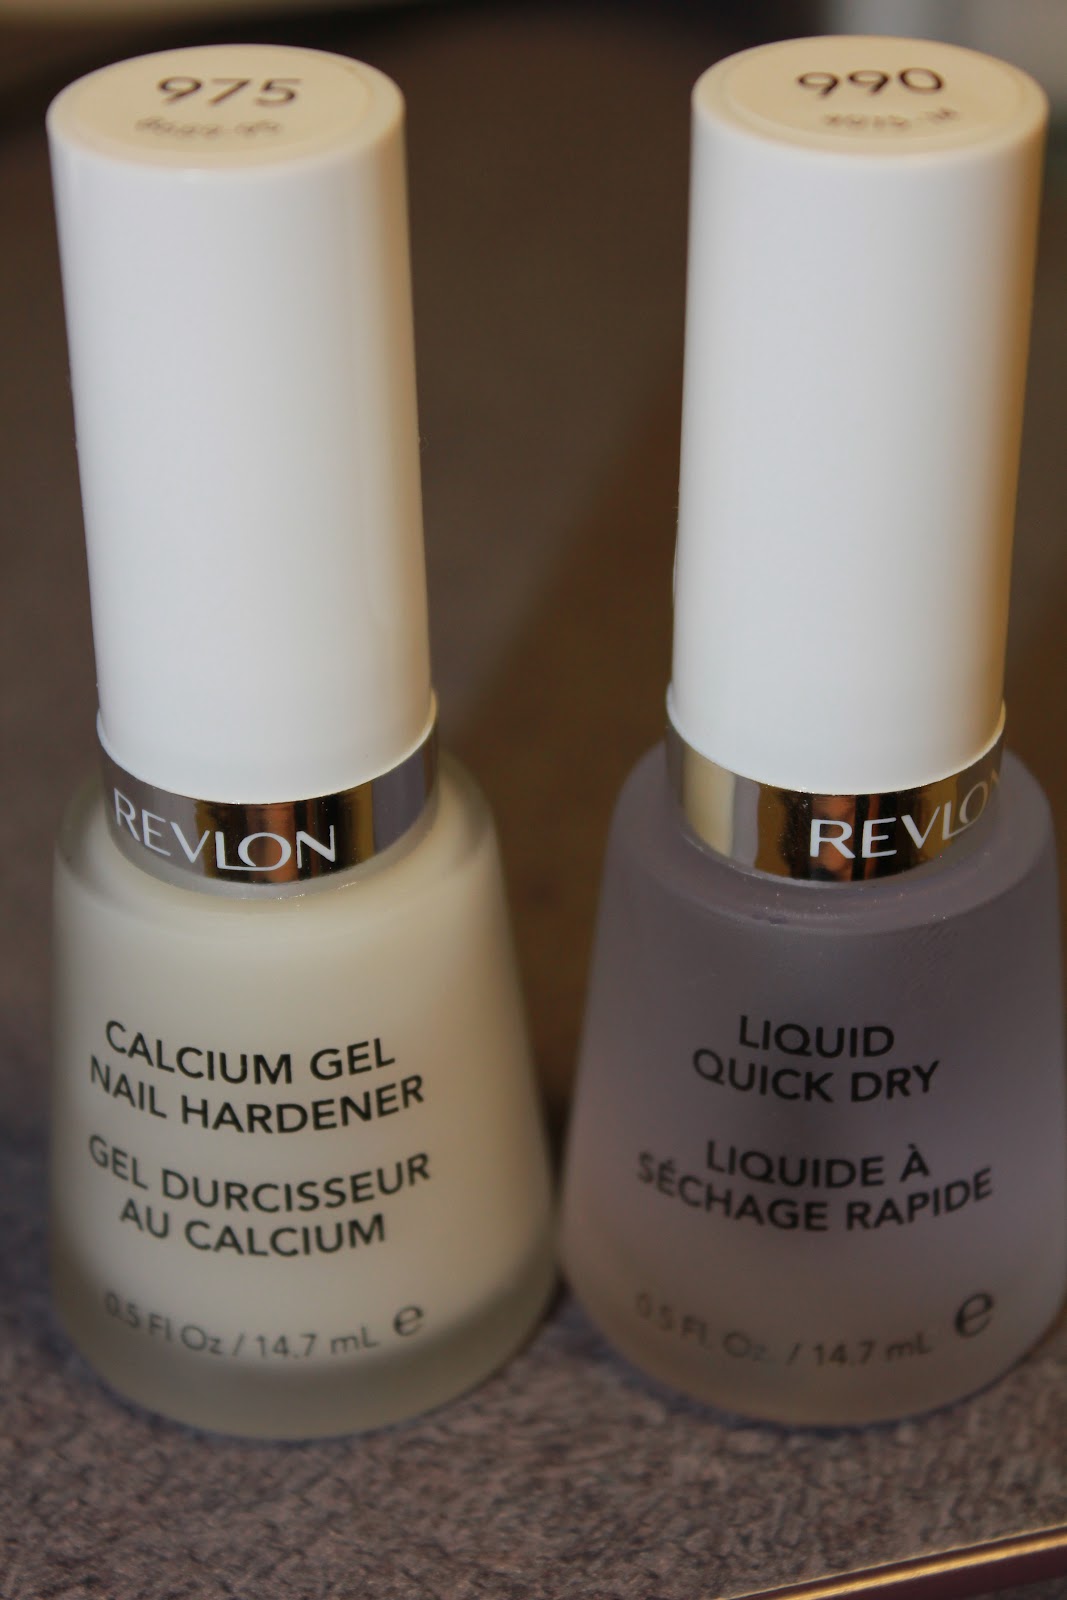 Calcium Nail Hardener and Liquid Quick Dry. I've had a problem with my nails